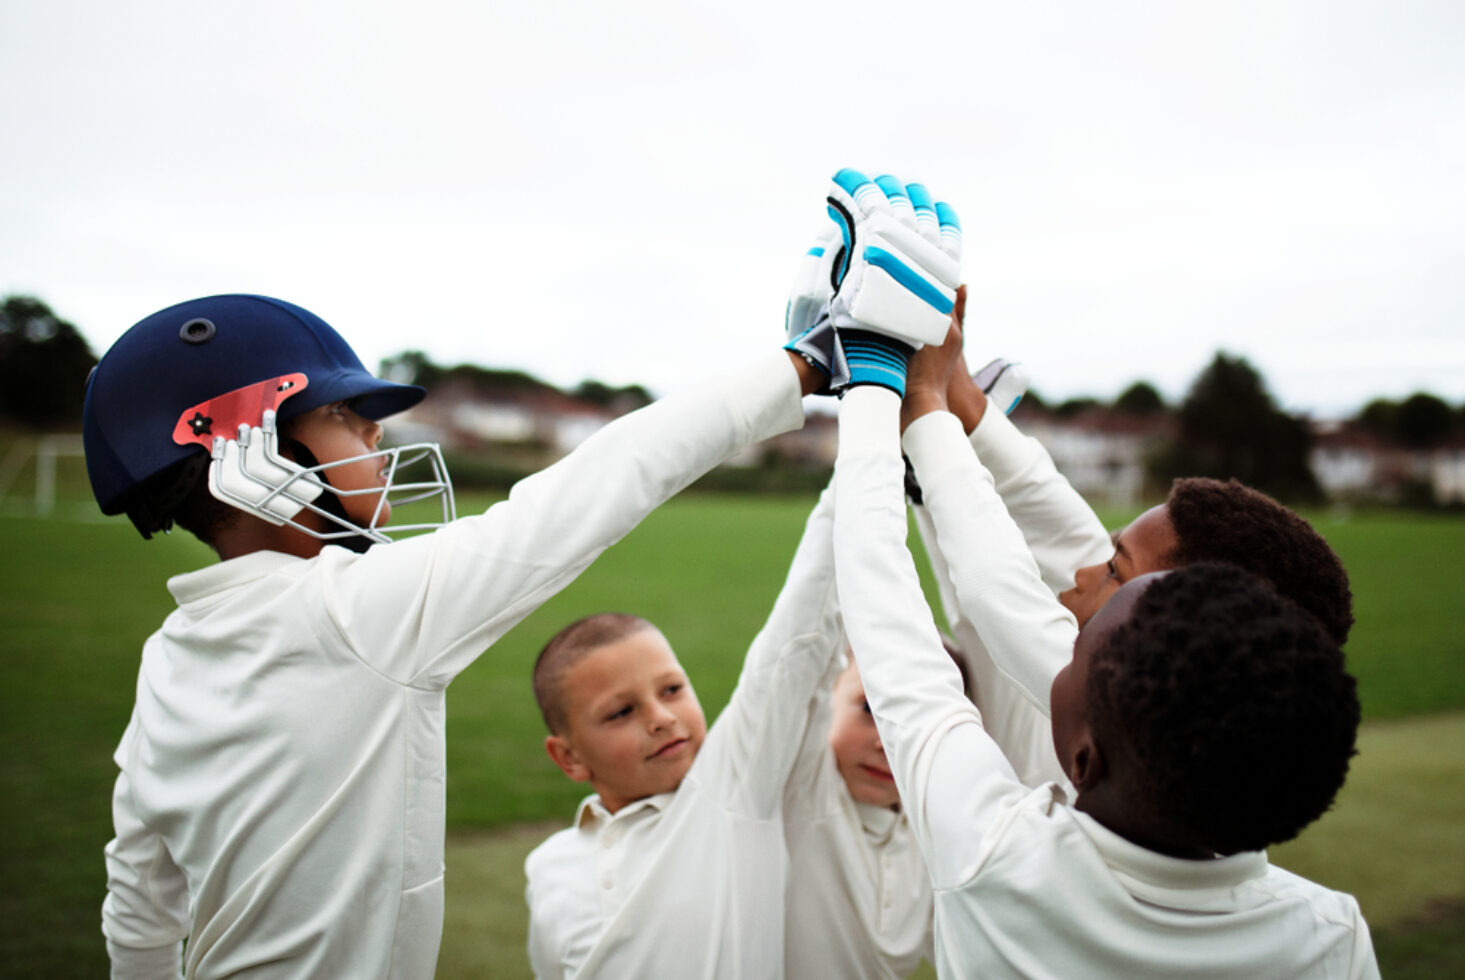 Safety Guidelines for Kids Playing Cricket